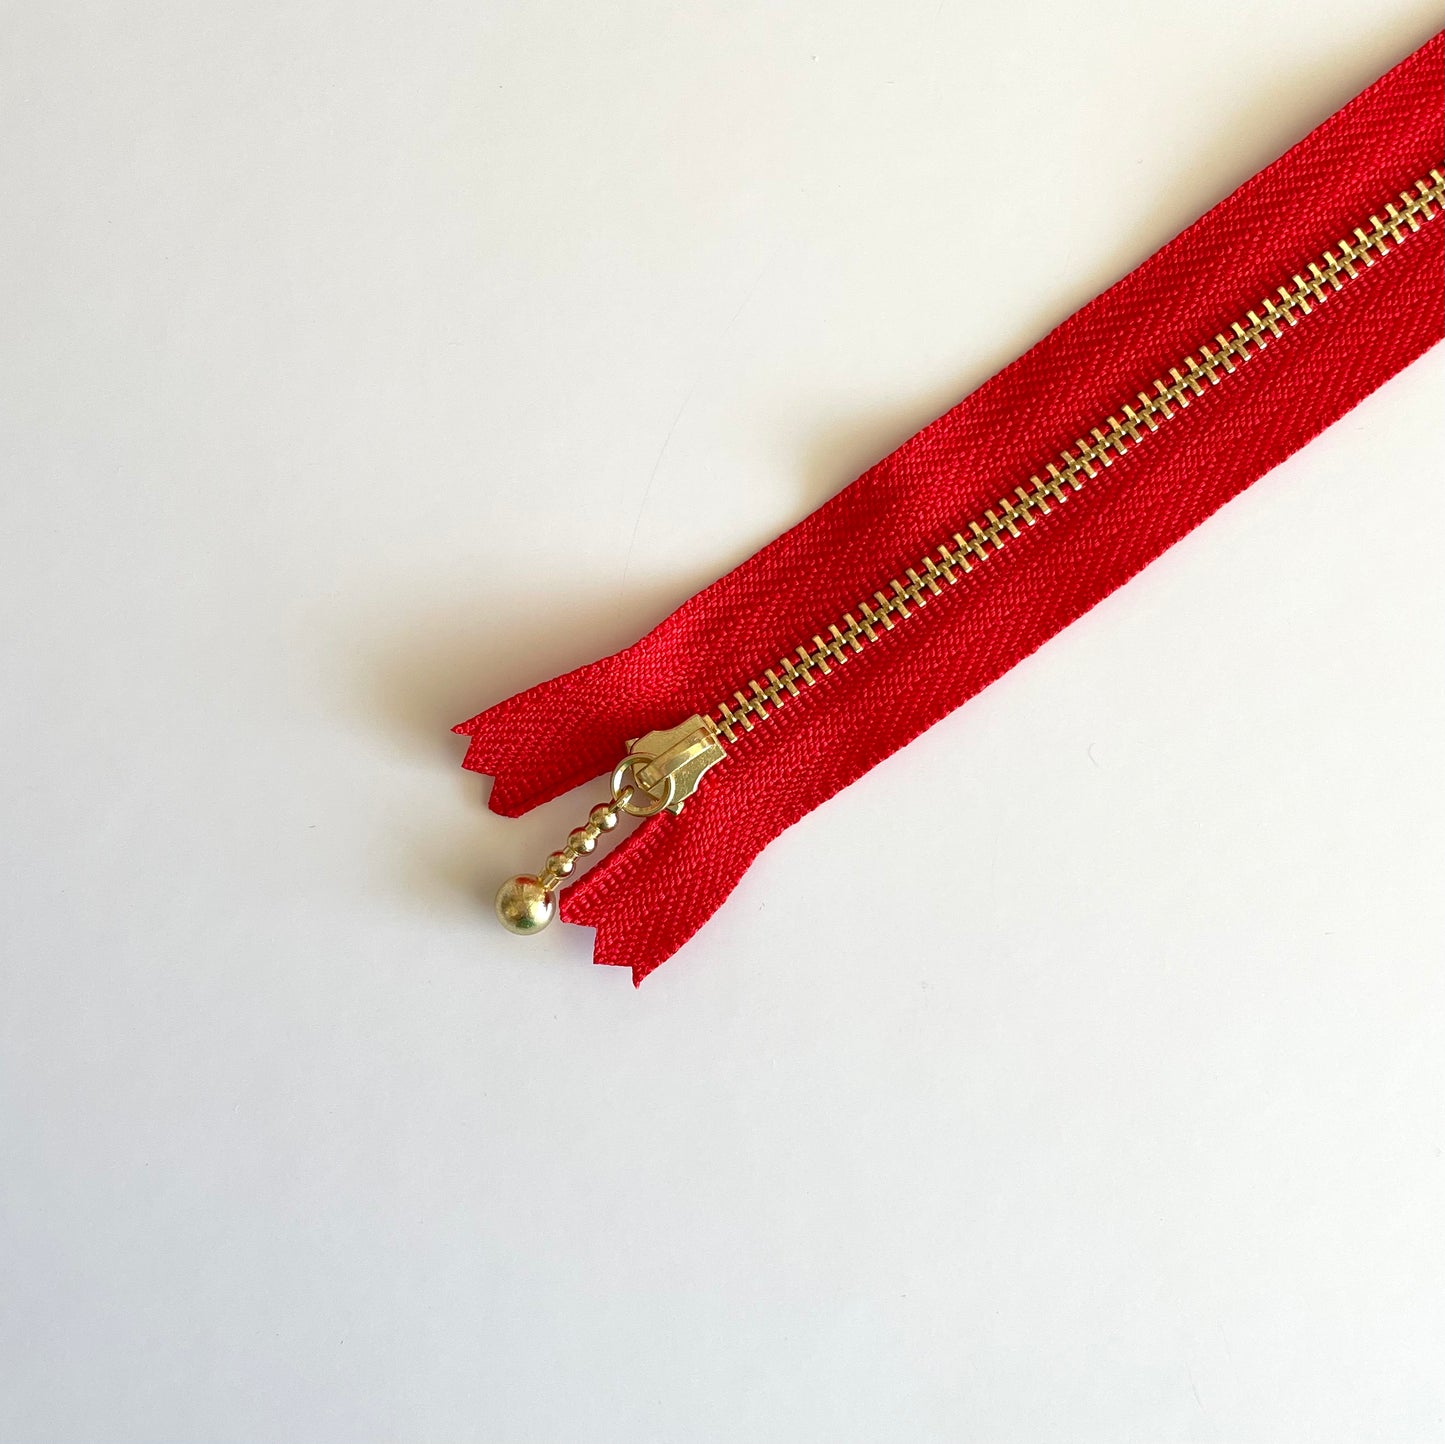 YKK Metalic Zippers with Water-drop Pull - Red (12" - 30CM)